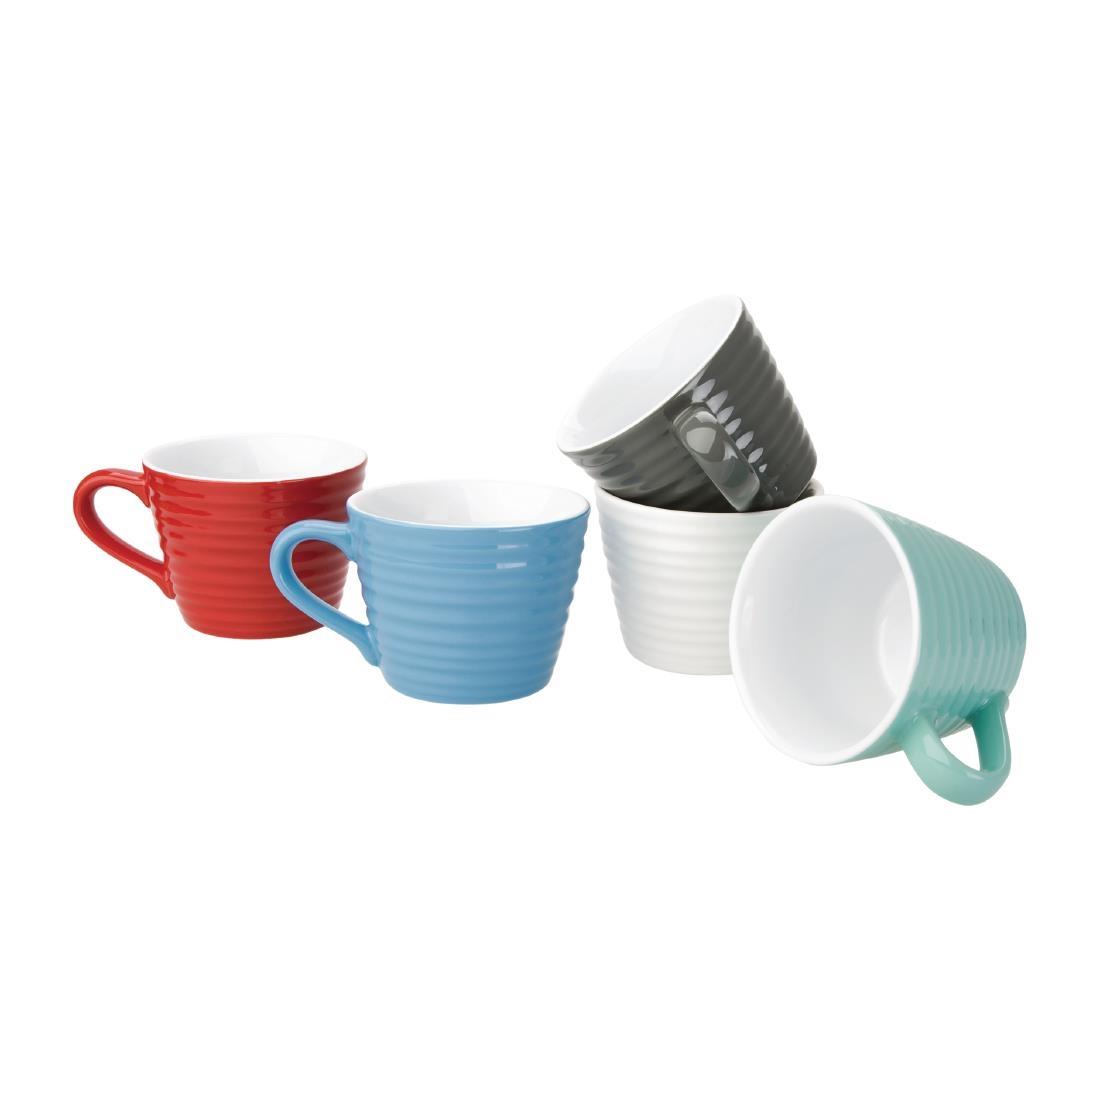 Olympia Café Aroma Mugs Blue 230ml (Pack of 6) - DH636  - 2